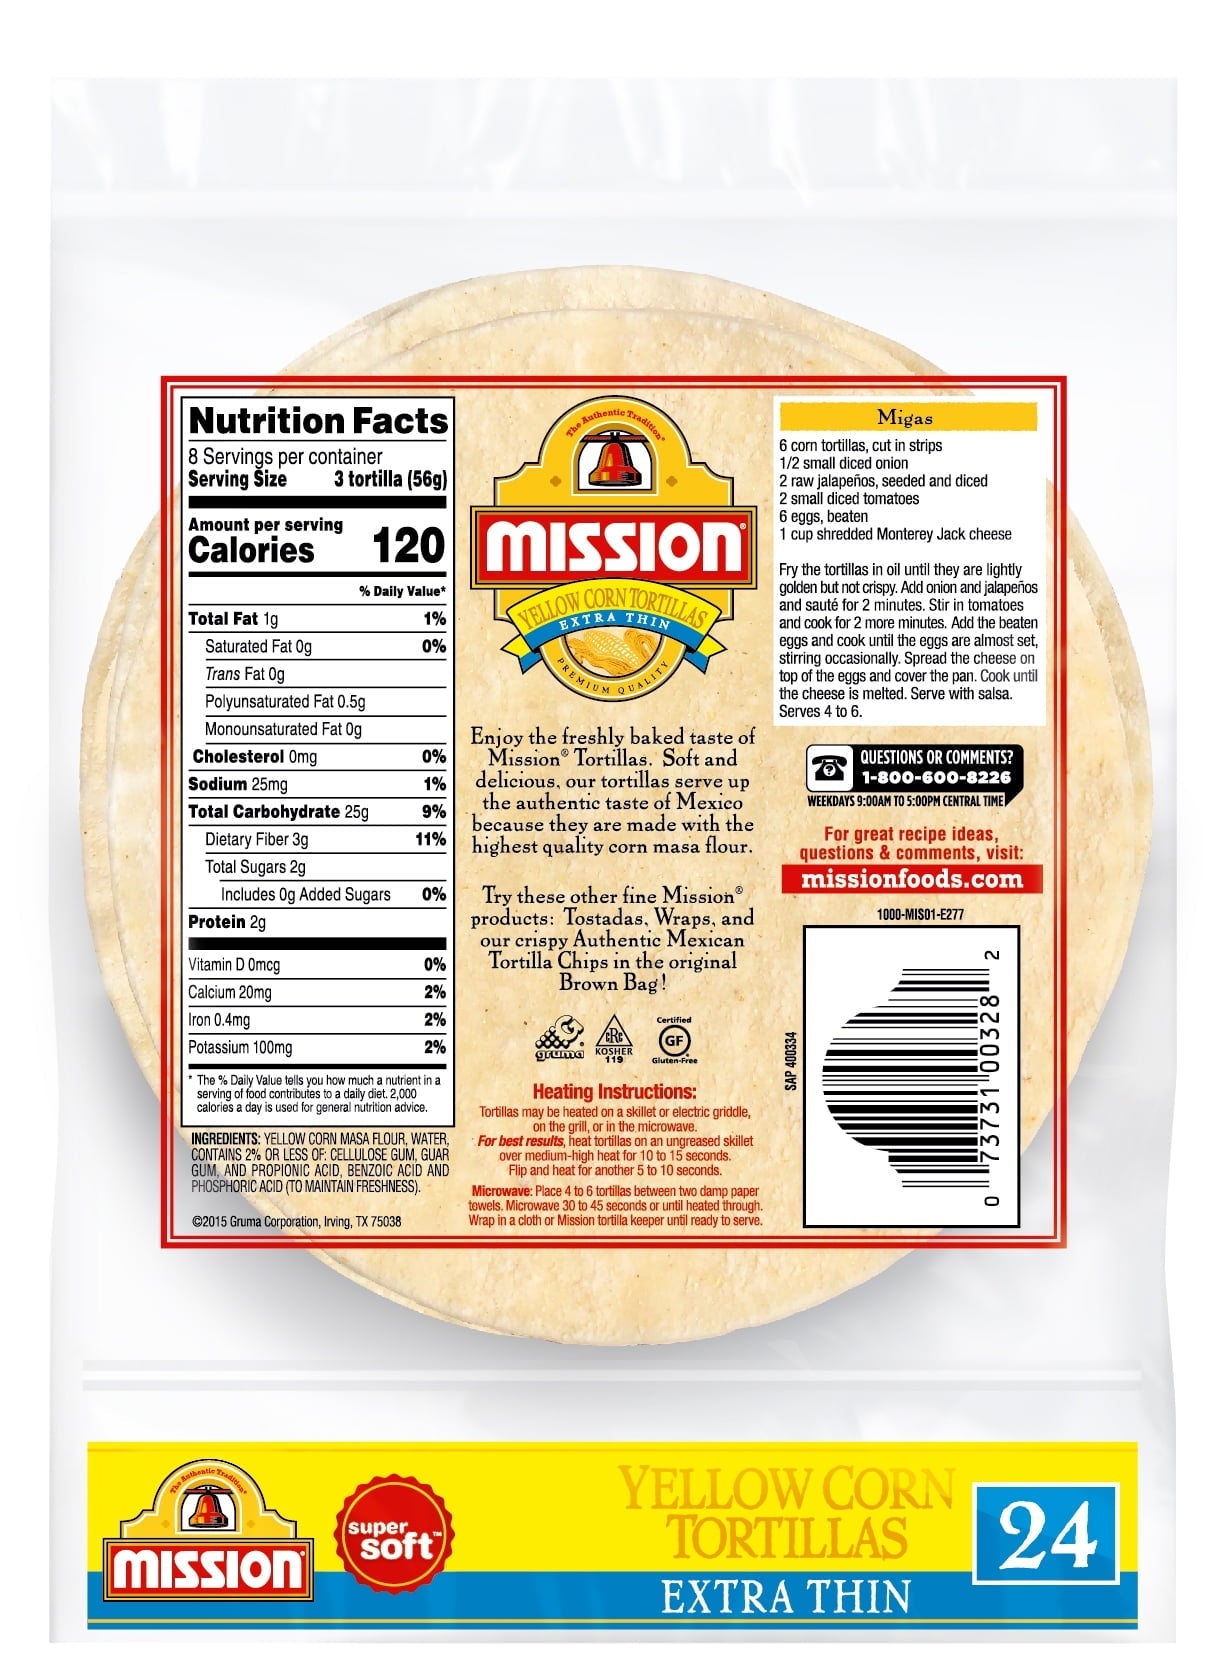 Mission Extra Thin Yellow Corn Tortillas, 24 Count